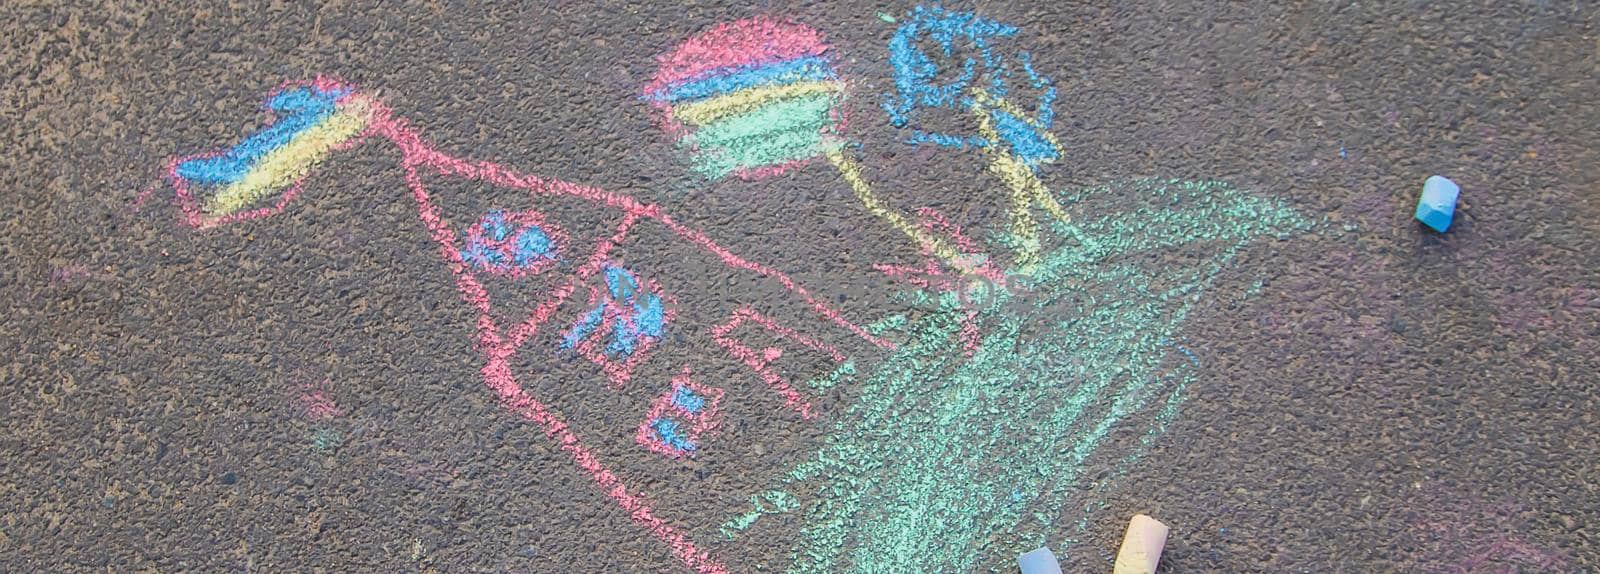 Children's drawings on the asphalt with chalk. Selective focus. by yanadjana